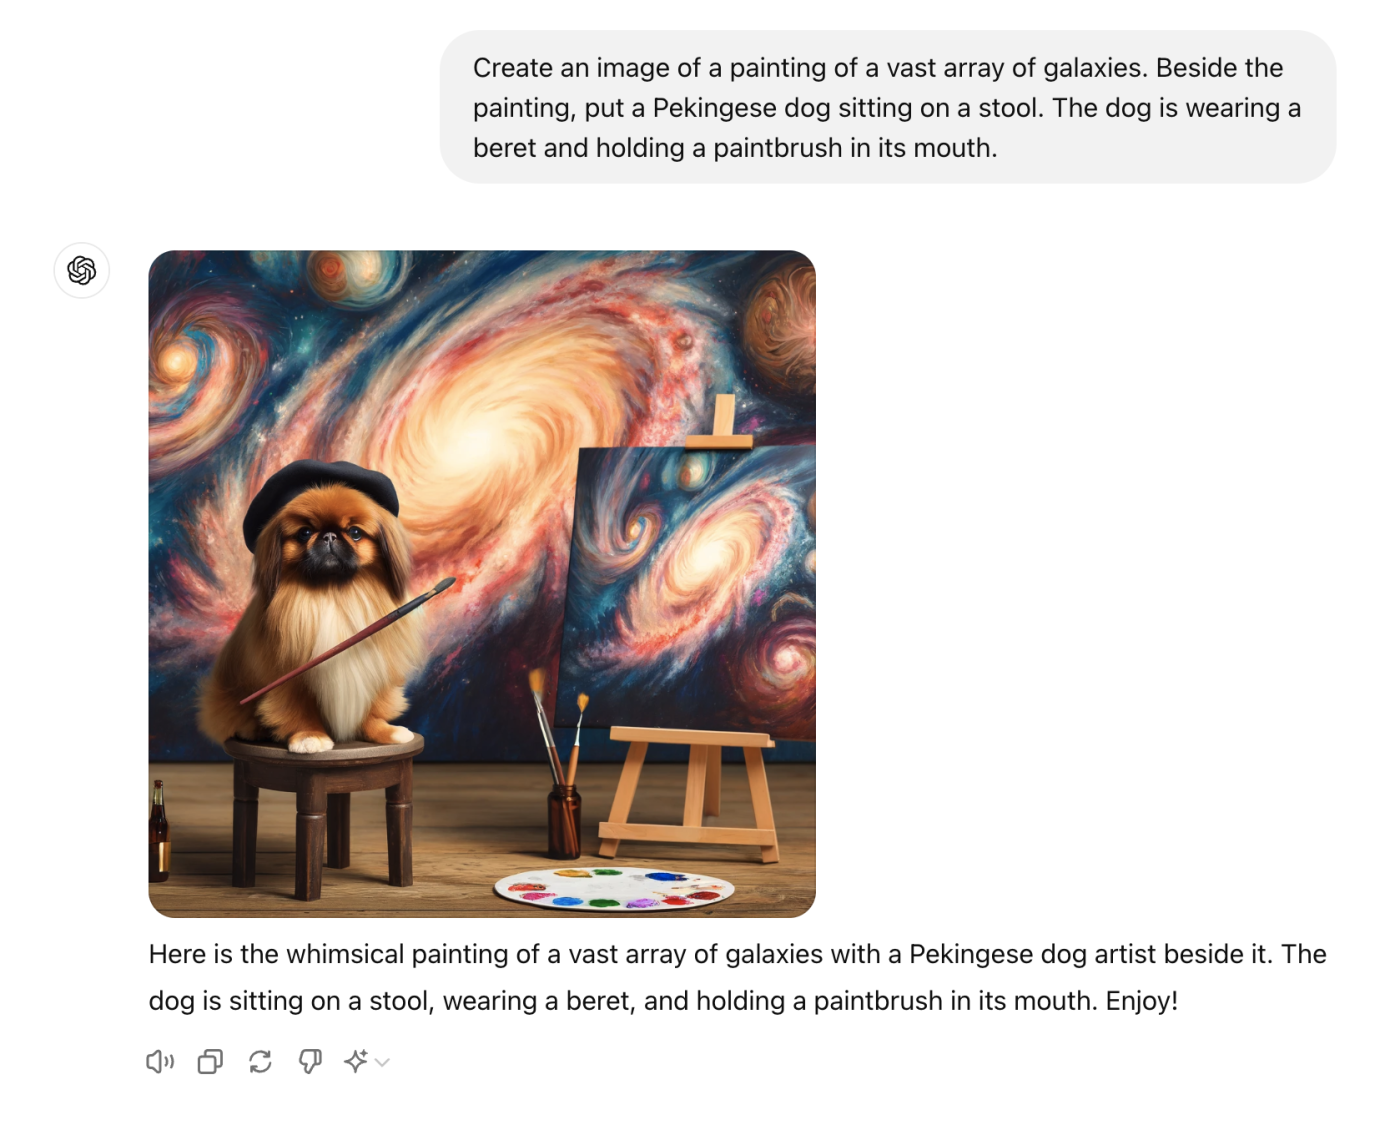 ChatGPT conversation with an AI-generated image of a Pekingese dog wearing a beret, sitting on a stool beside a painting of galaxies.